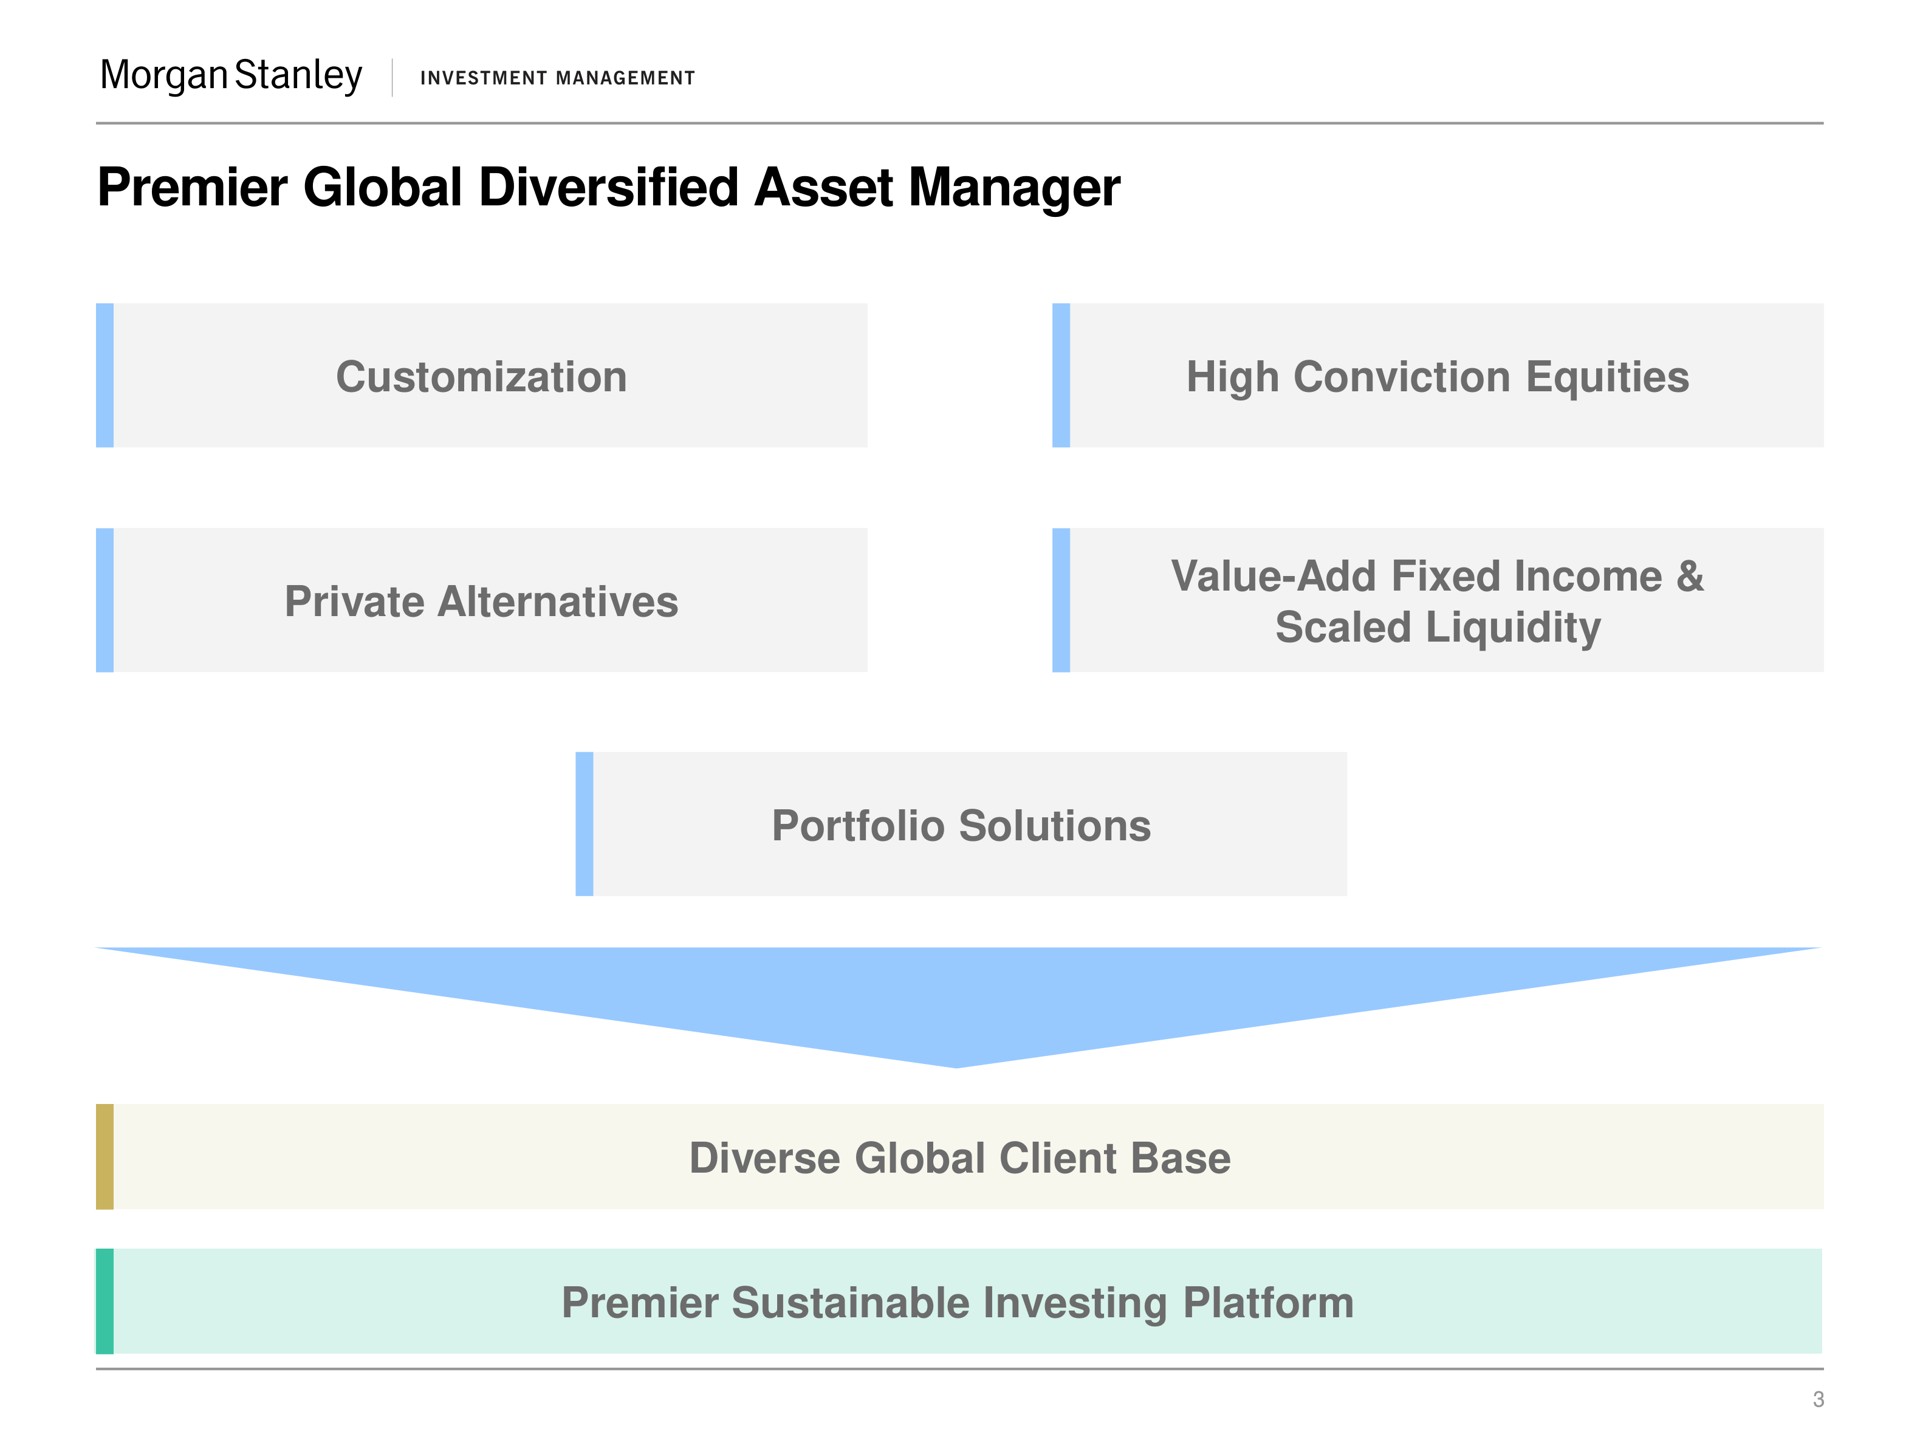 premier global diversified asset manager high conviction equities private alternatives value add fixed income scaled liquidity portfolio solutions diverse global client base premier sustainable investing platform | Morgan Stanley